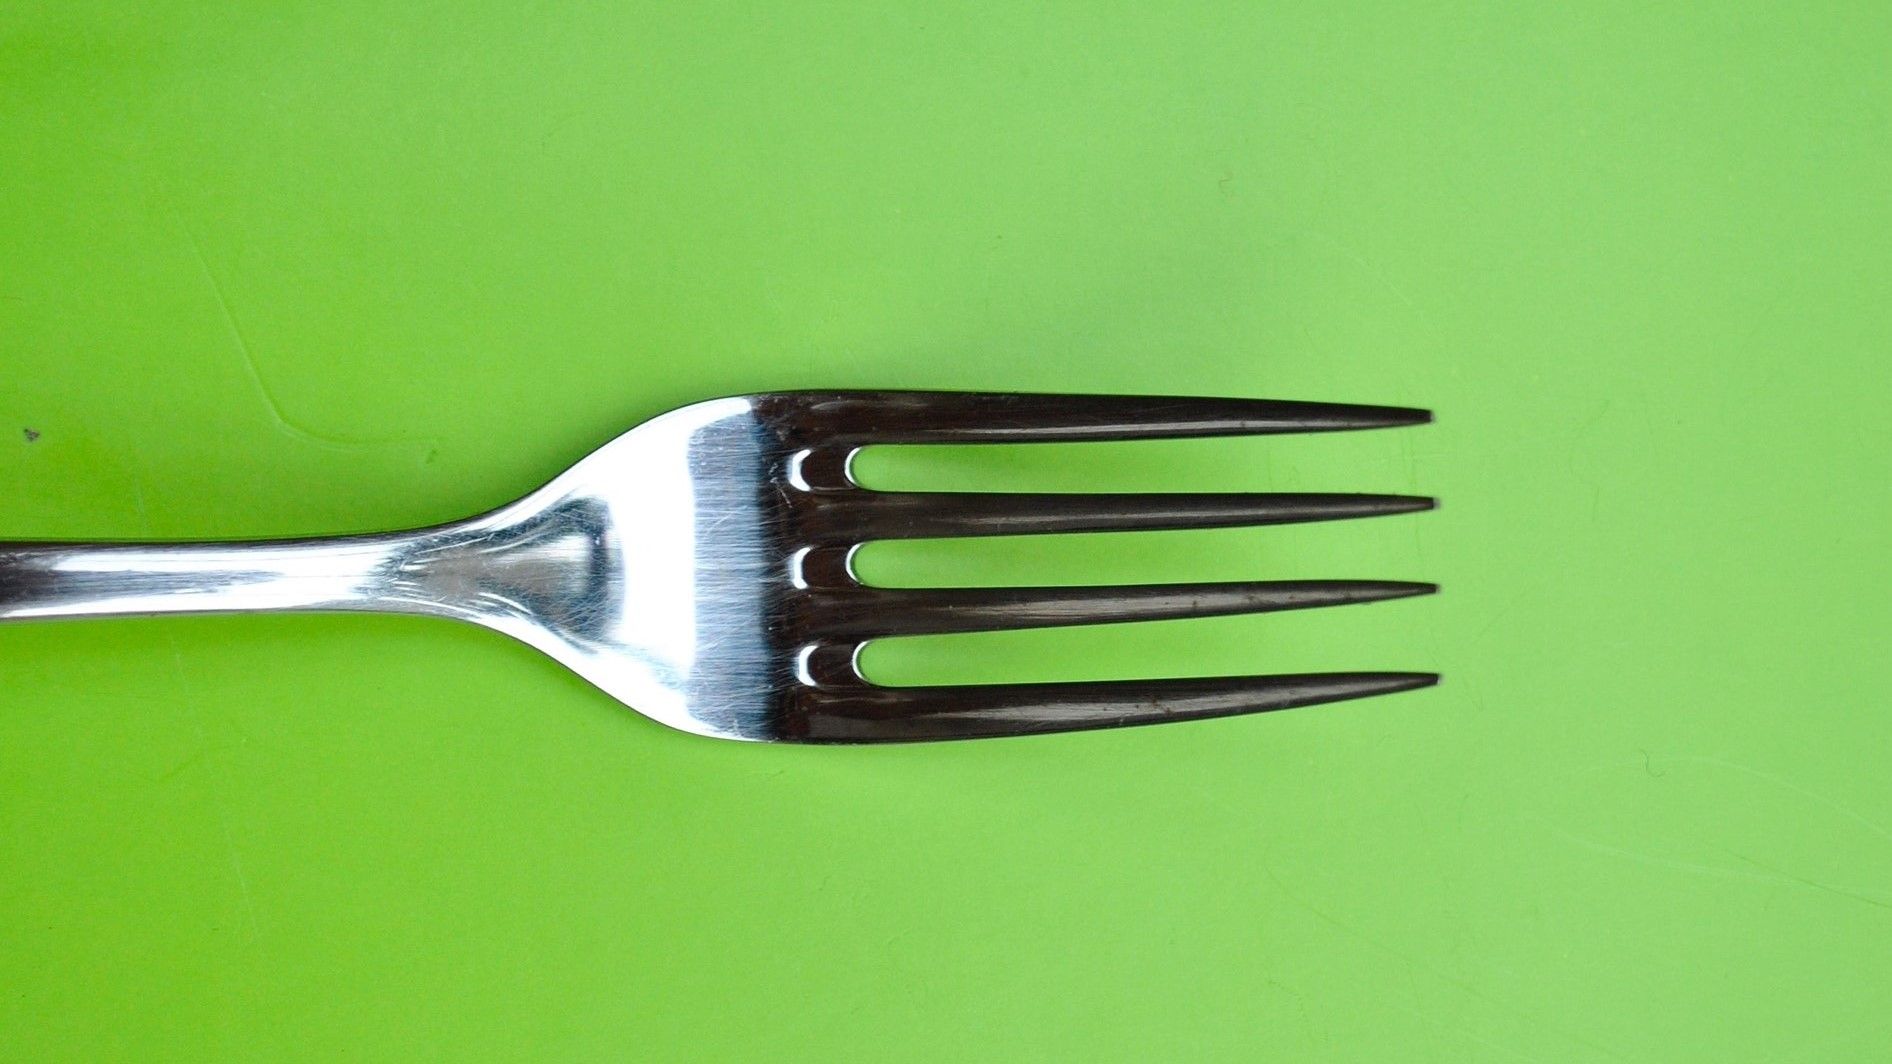 What the fork - How to switch to a fork after cloning a remote repository